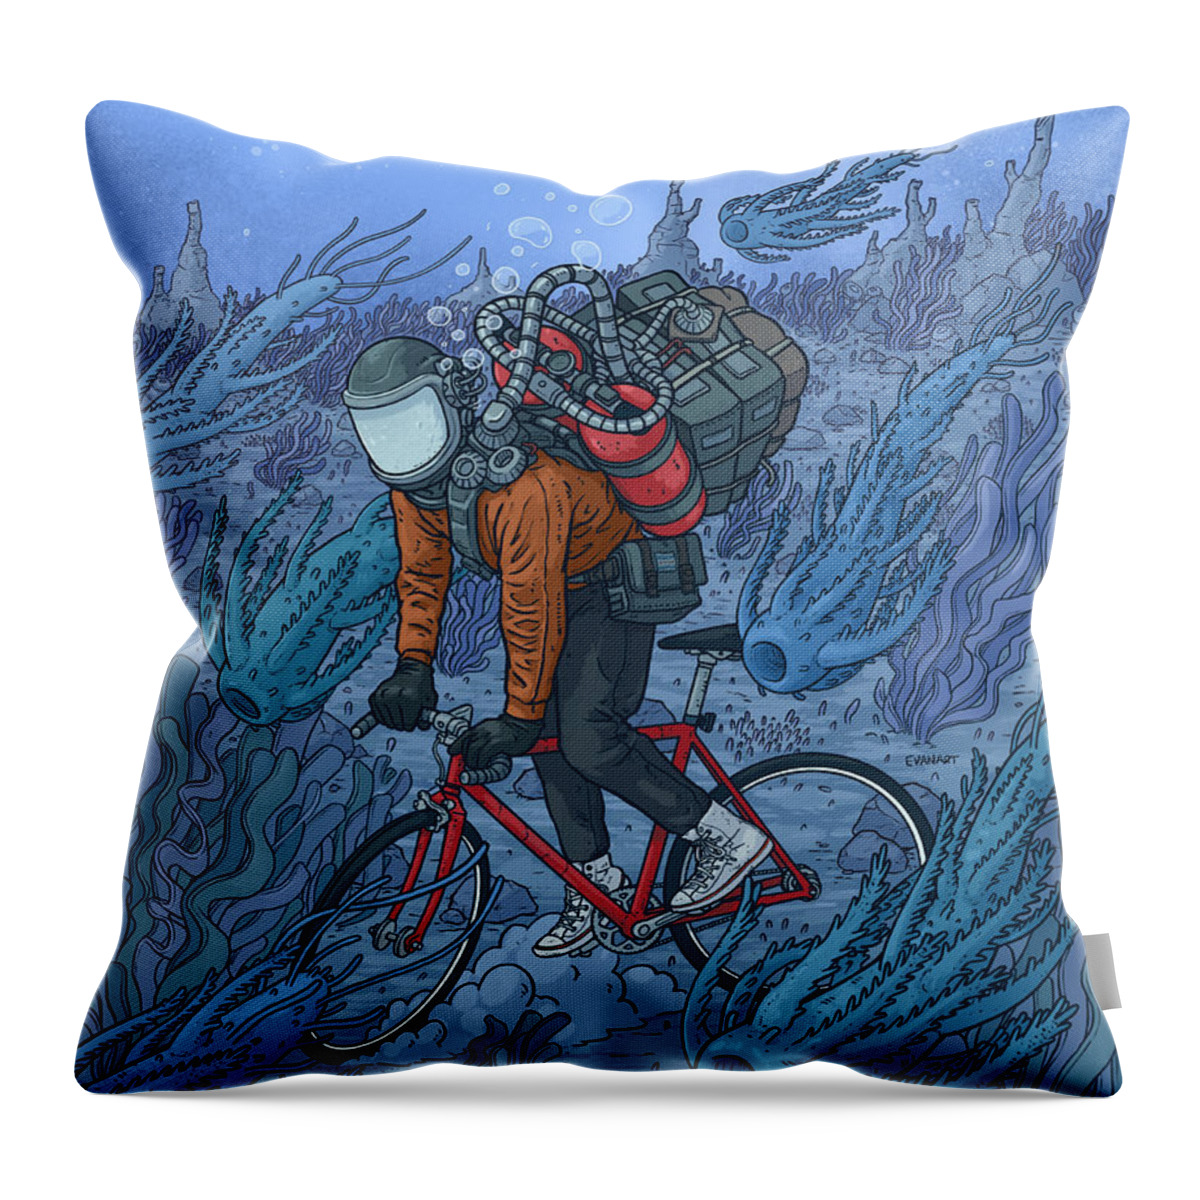 Cycling Throw Pillow featuring the digital art Traffic by EvanArt - Evan Miller